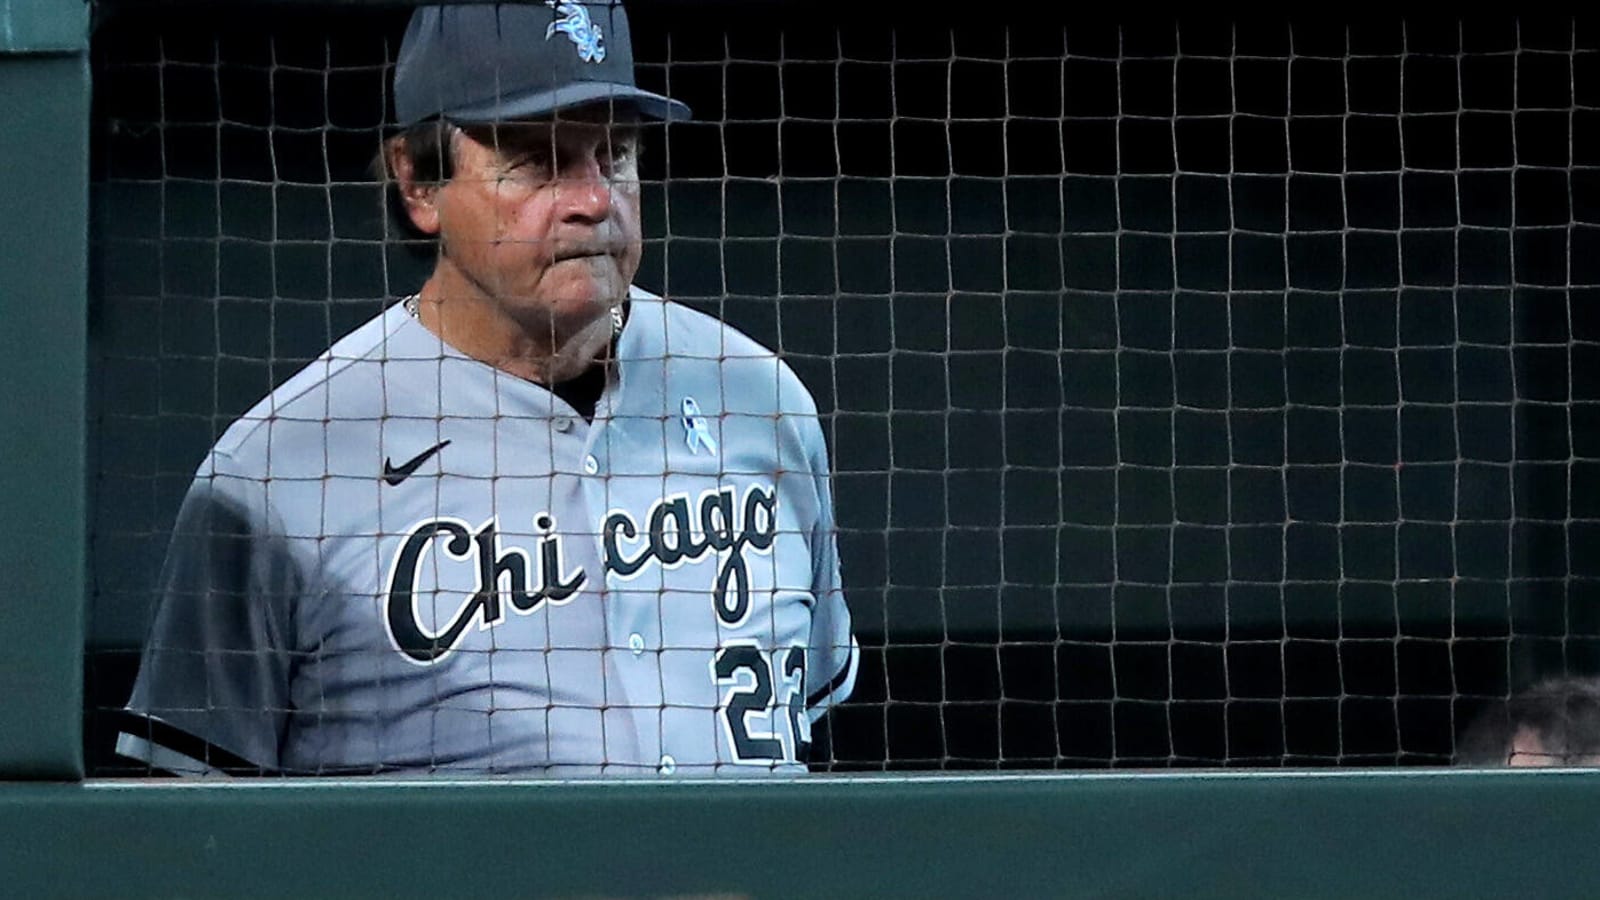 Is betting the White Sox to win the AL Central still a good idea?